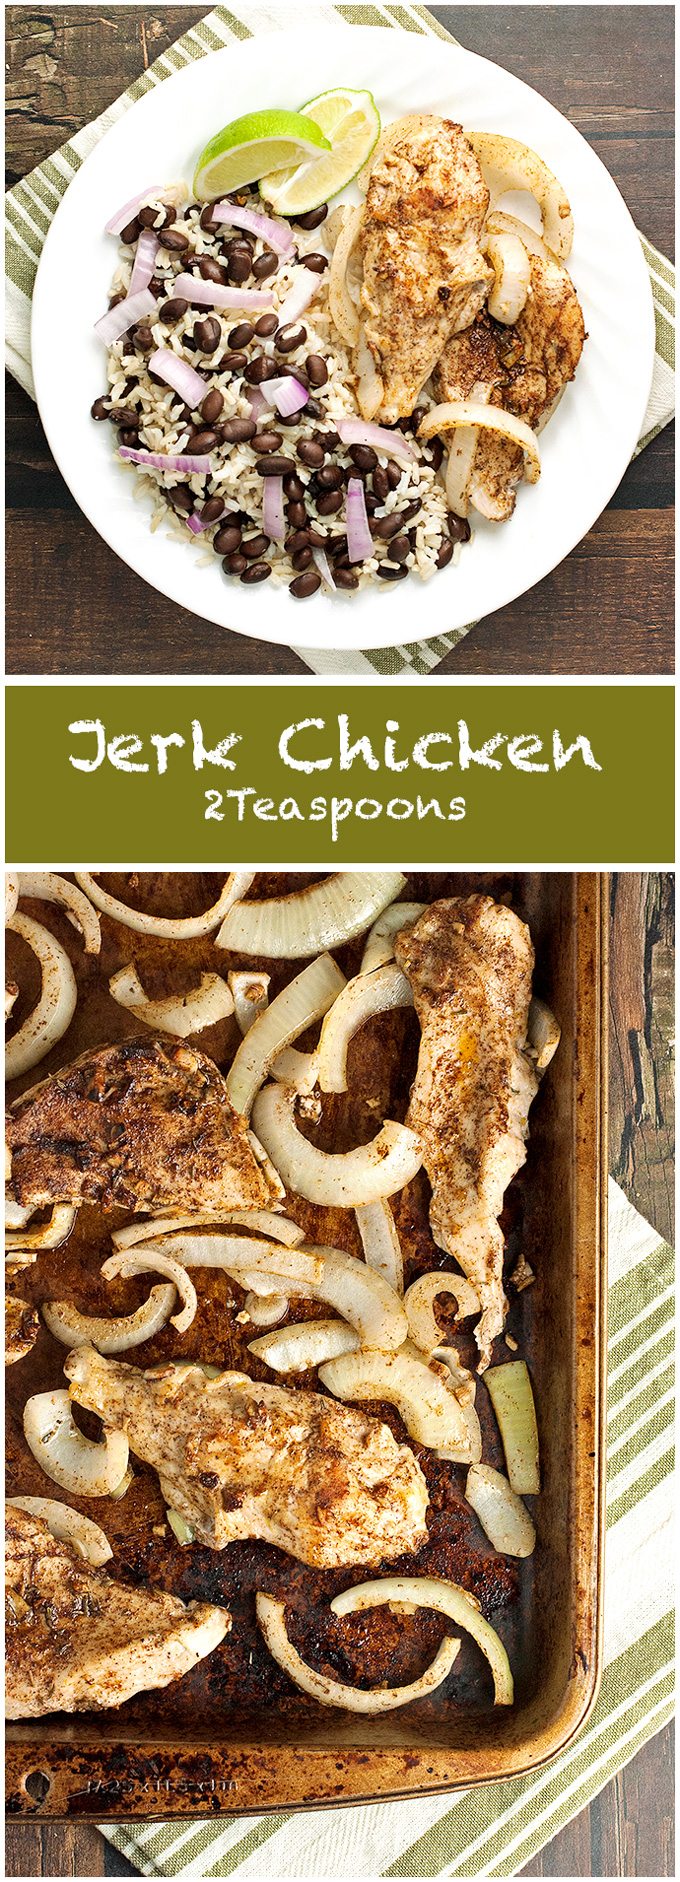 Jerk Chicken - Part spicy, part sweet, and totally delicious -This recipe will enliven your taste buds using common spices you have in your cupboard- 2teaspoons.com